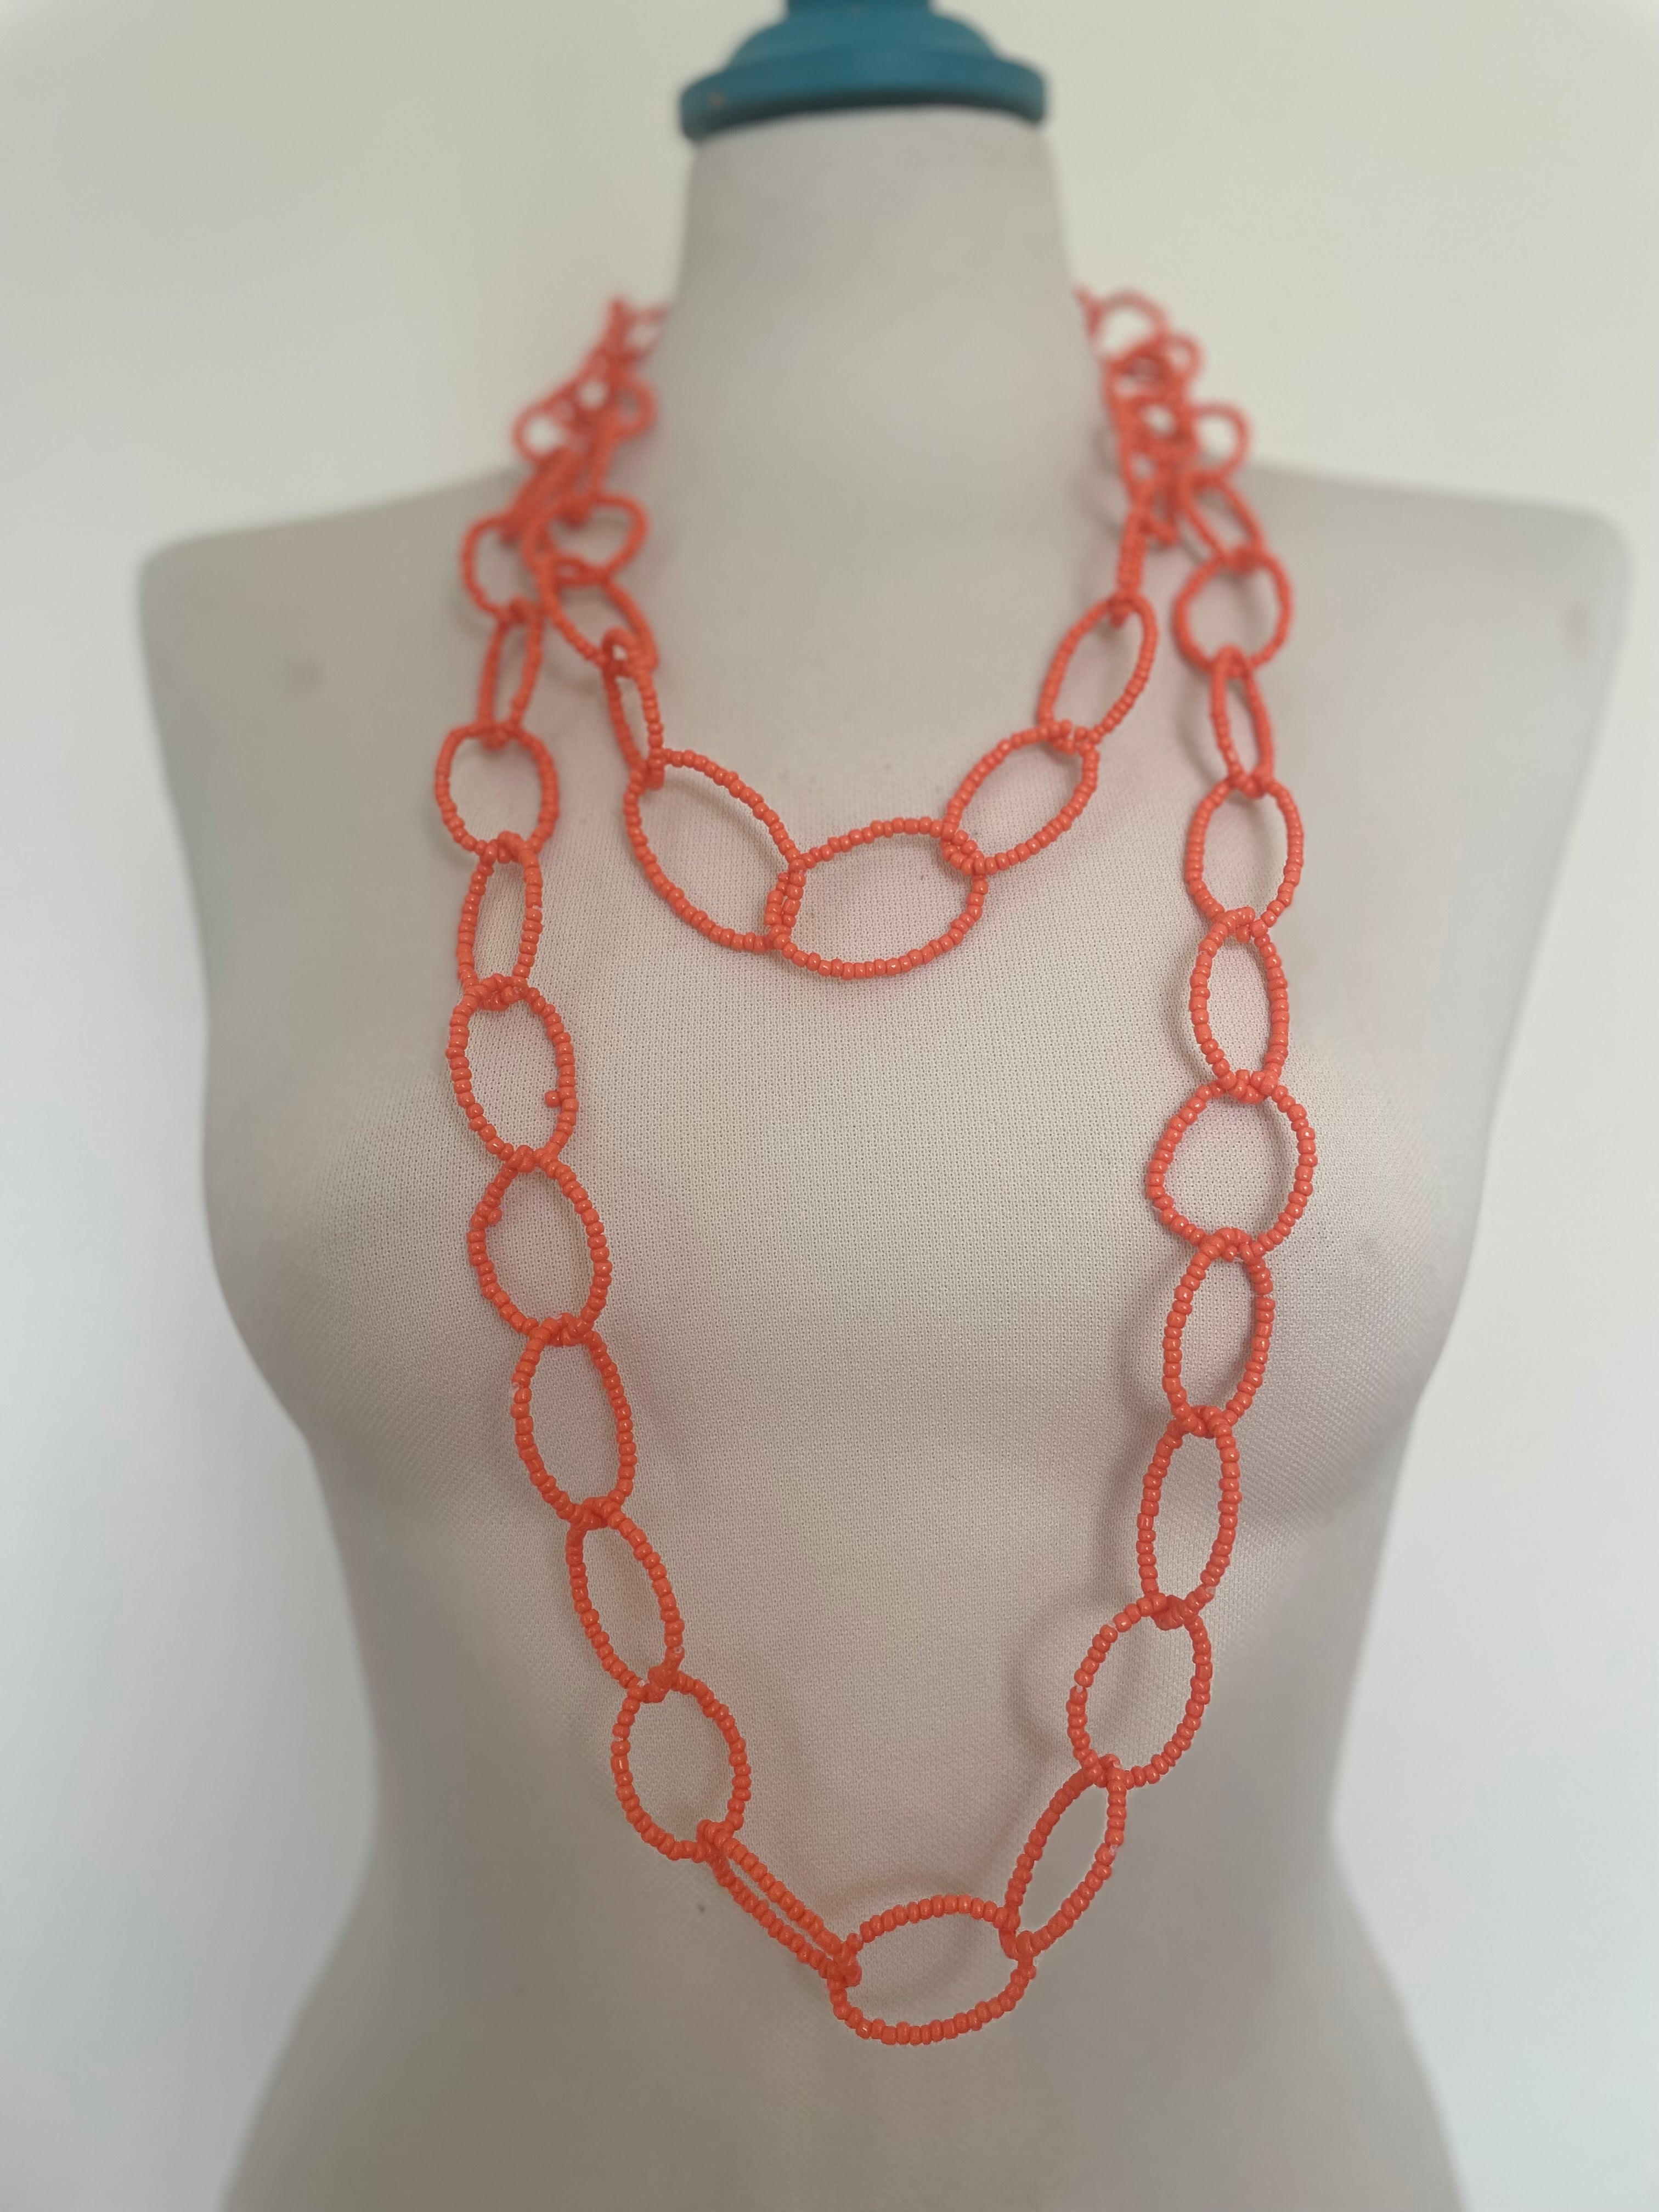 Bead Chain Necklace - Coral